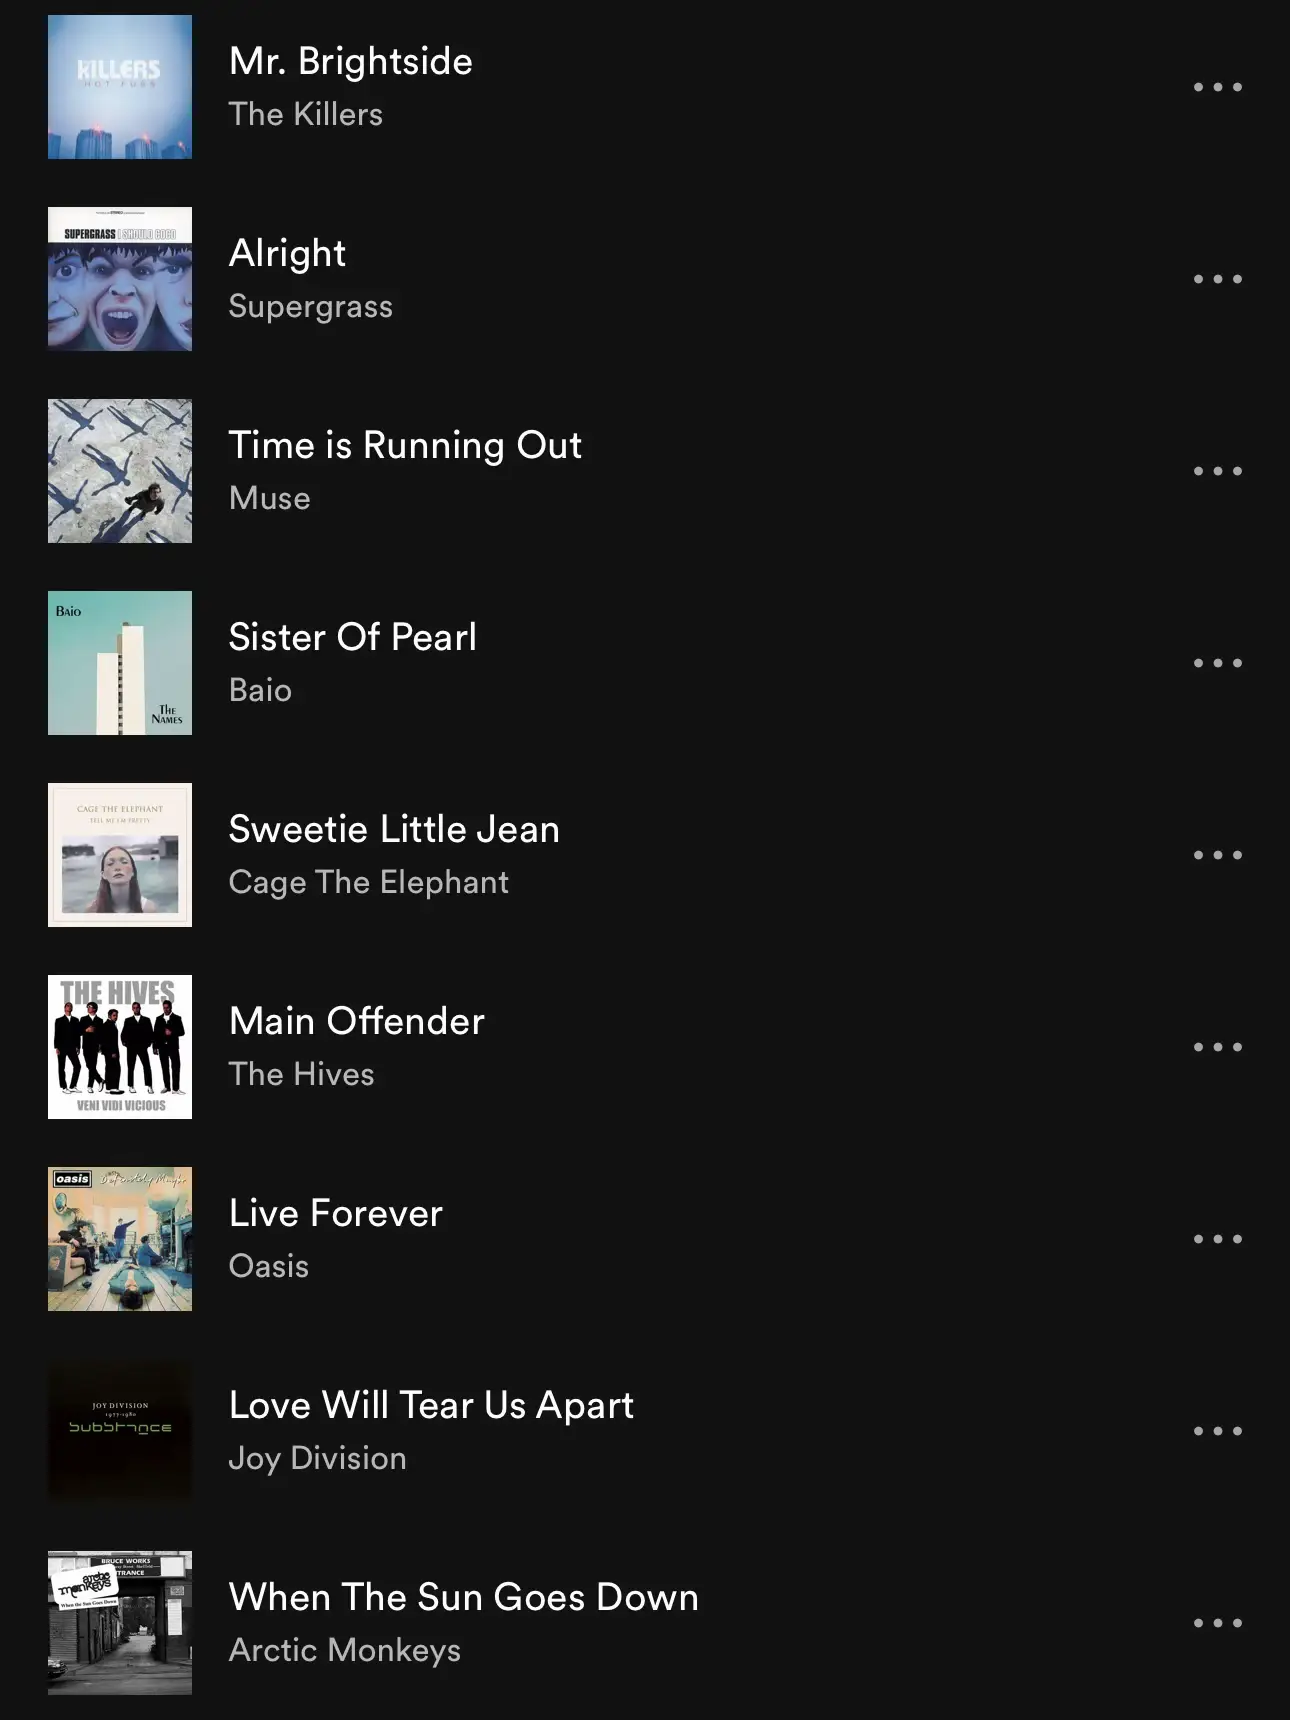  A list of songs with a picture of the band